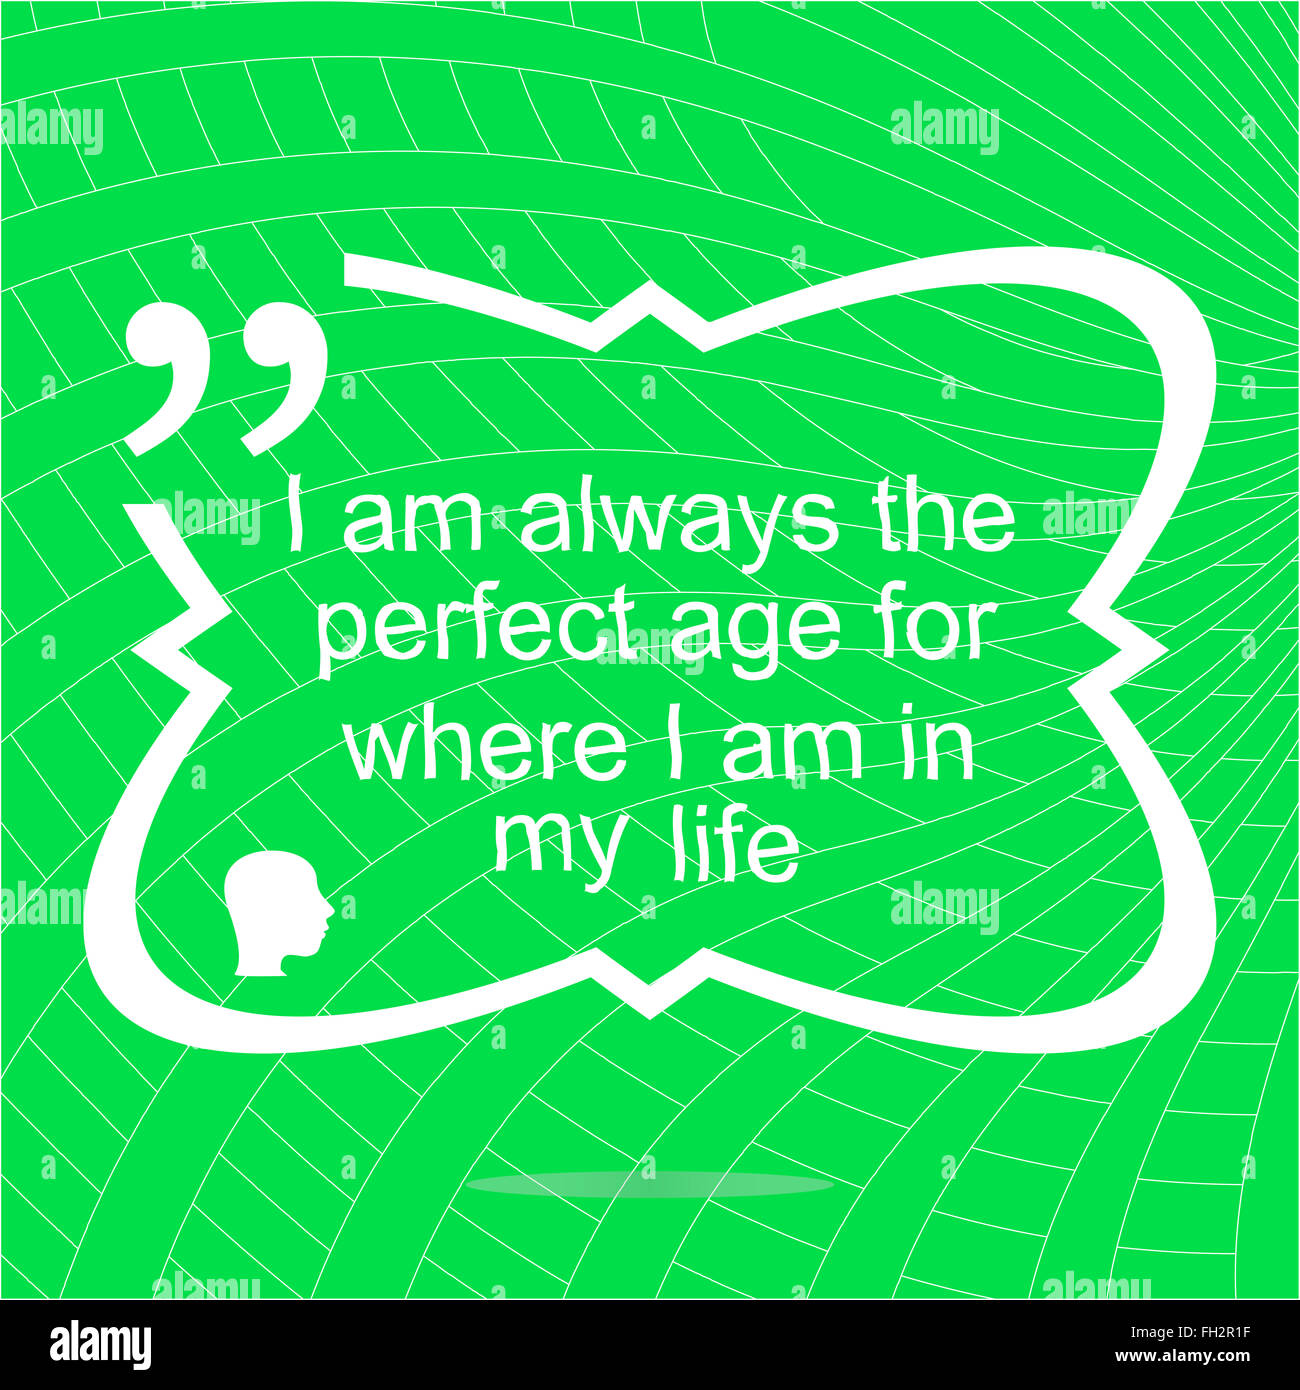 I am always the perfect age for where i am in my life. Inspirational motivational quote. Simple trendy design. Positive quote Stock Photo